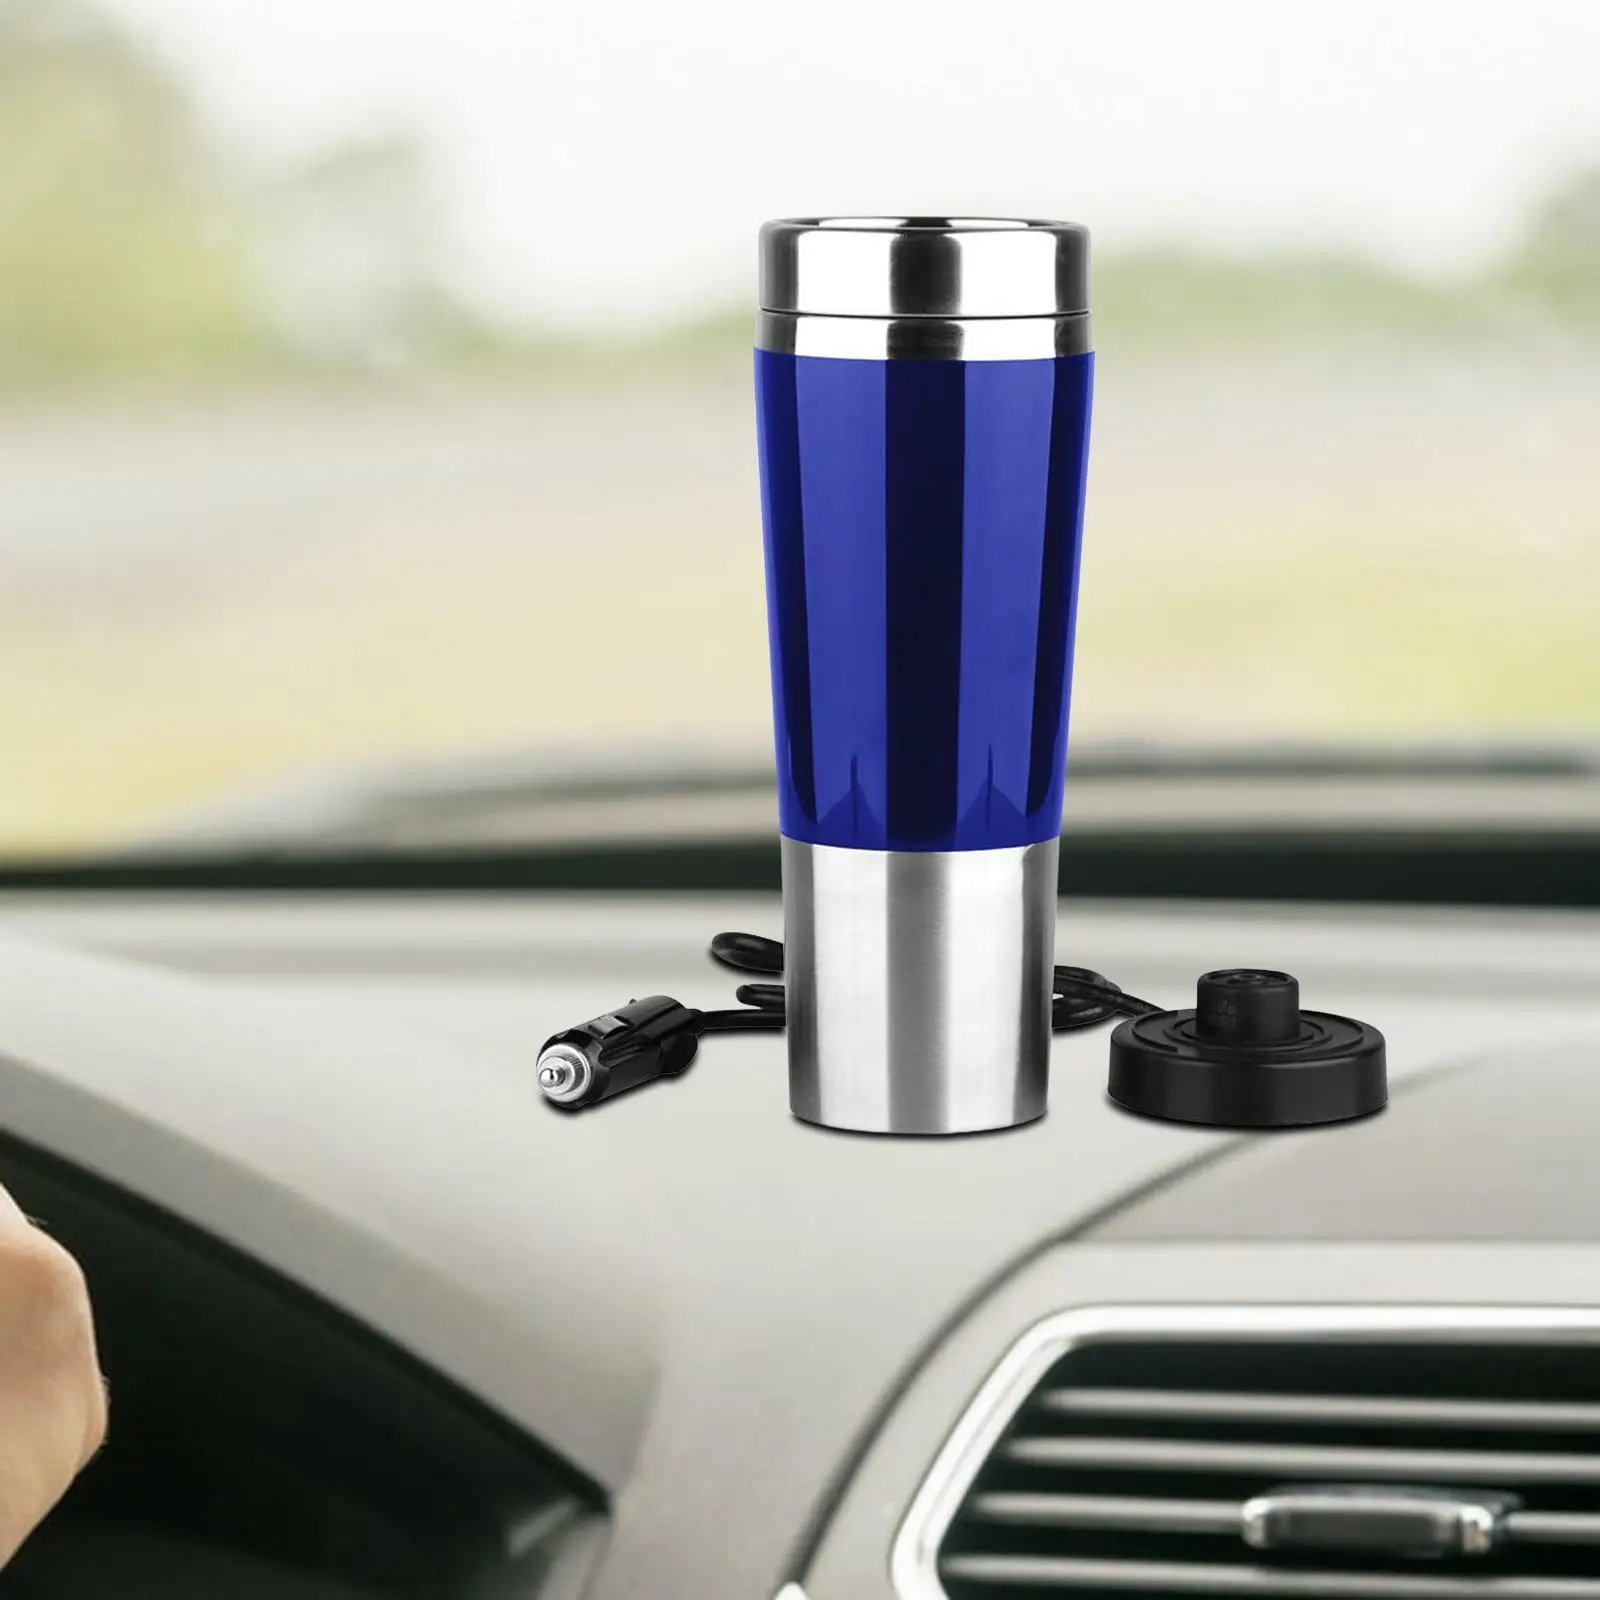 Portable 12V Car Kettle Boiler Electric Insulated Cup Heated Water Boiler Heater Cup for Coffee Milk Water Camping